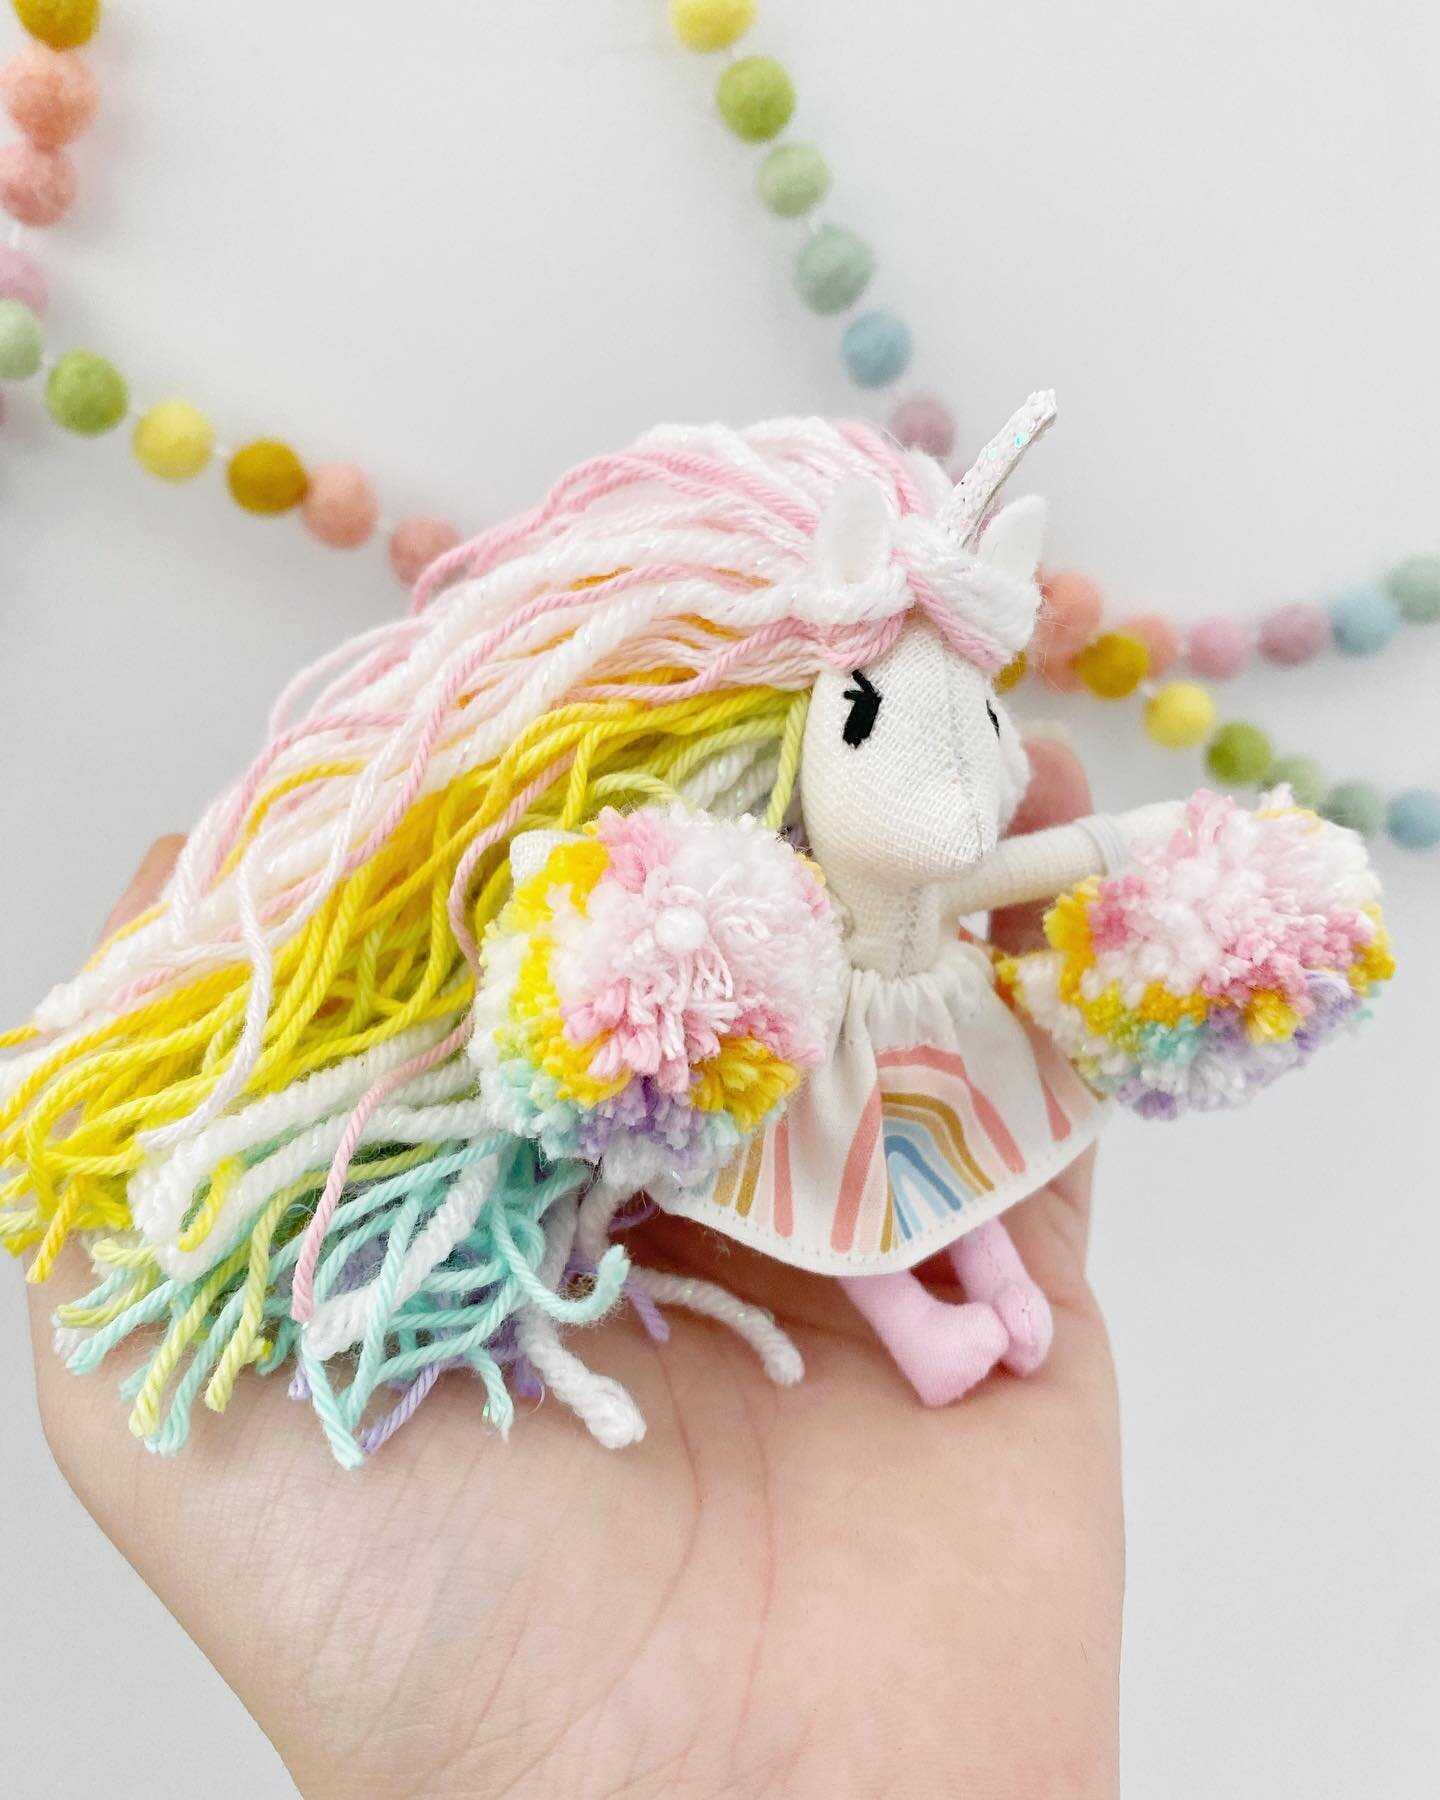 Tiny unicorn cheerleaders 🌈✨ in the shop today 3pm EST along with the rest of our back to school collection 🥰💕